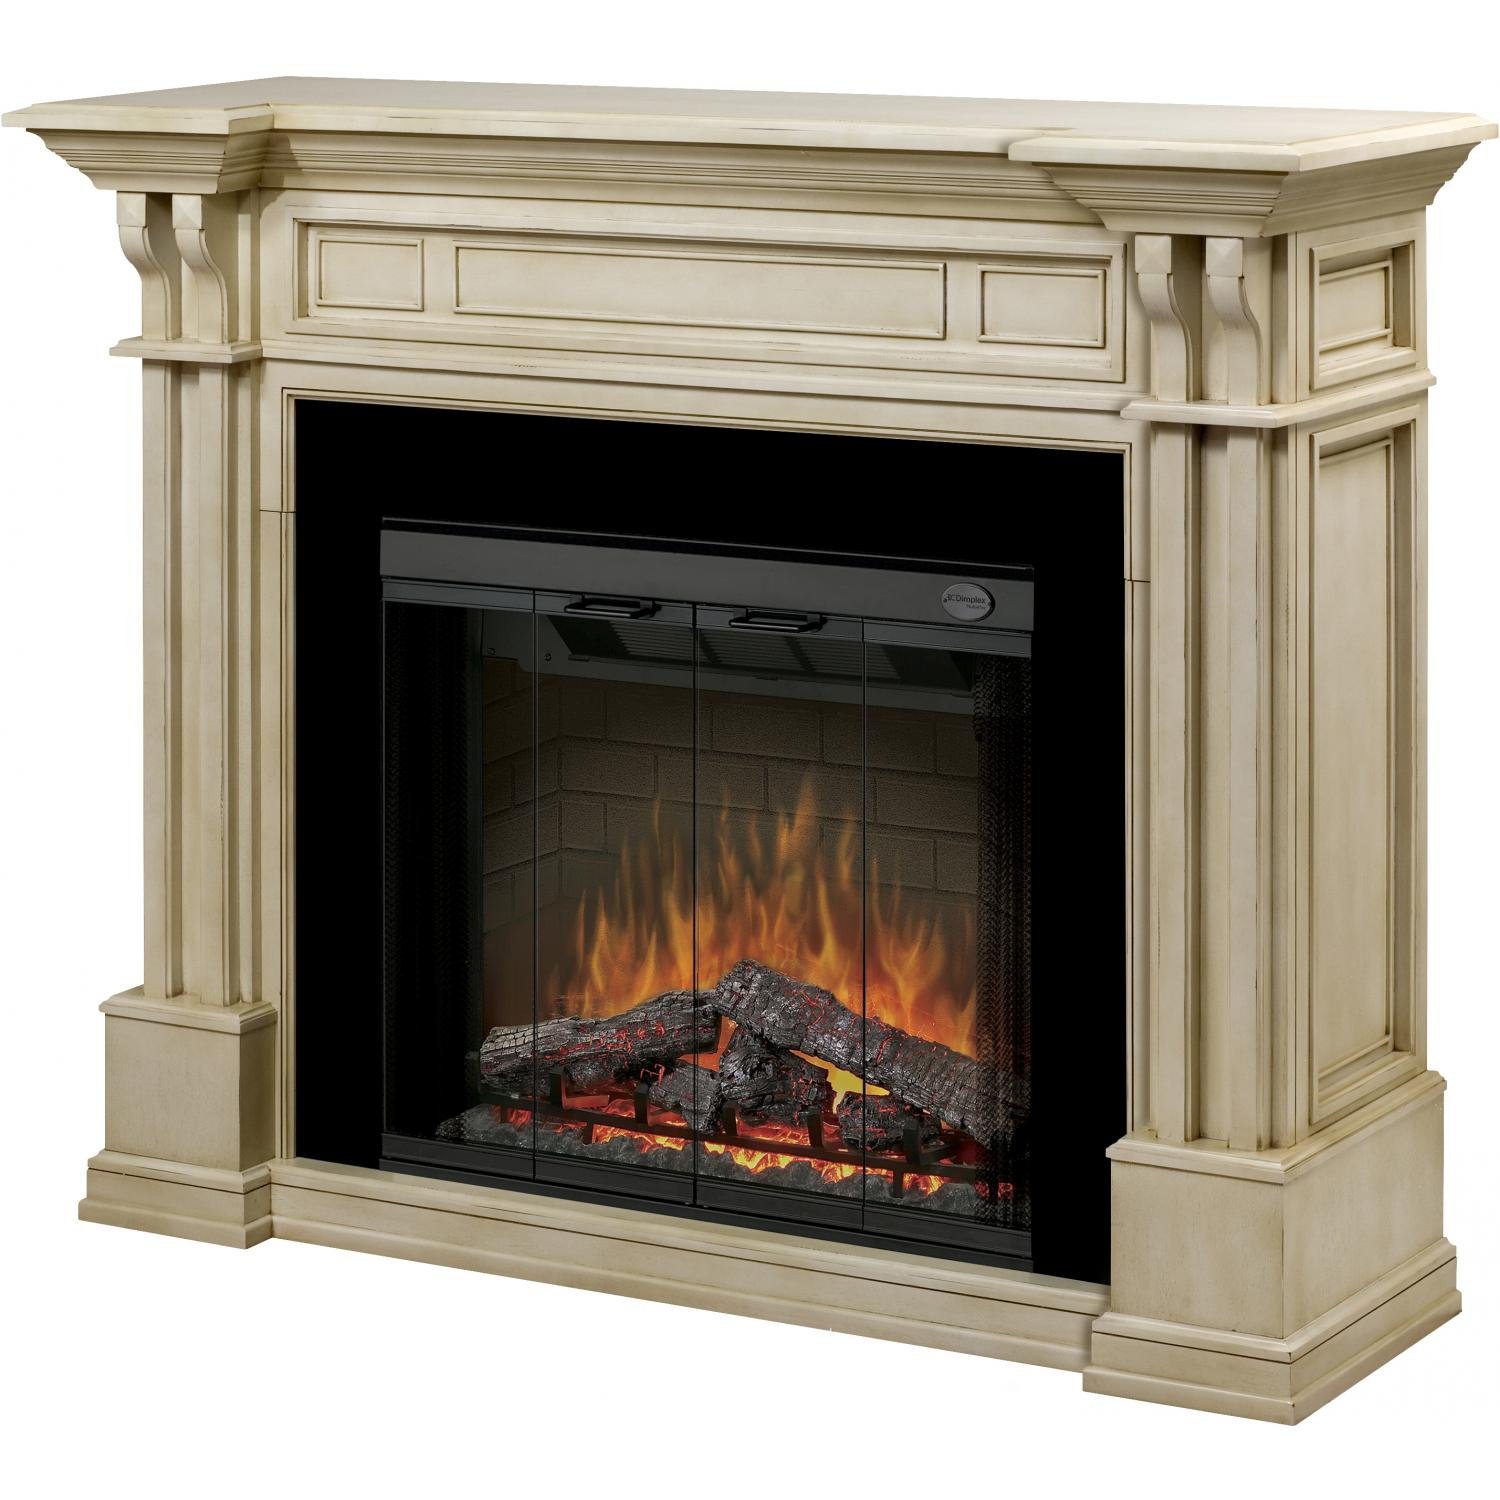 Vent Free Gas Fireplace Mantel Packages New Amazon Dimplex Kendal Electric Fireplace Finish